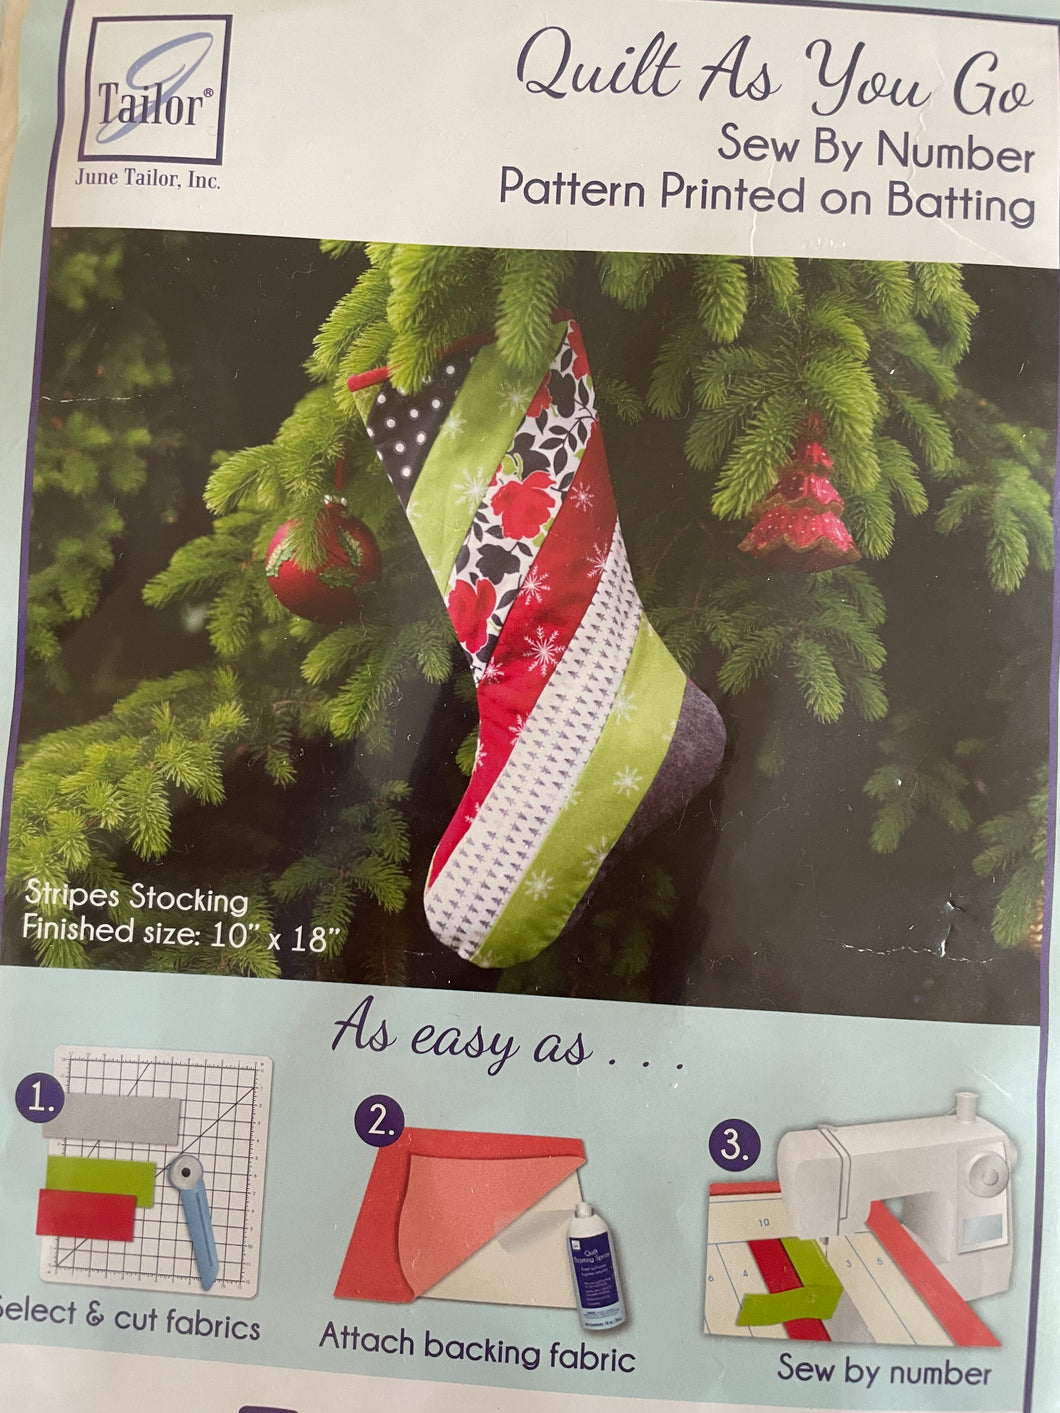 June Tailor Stripes Stocking  Quilt As You Go